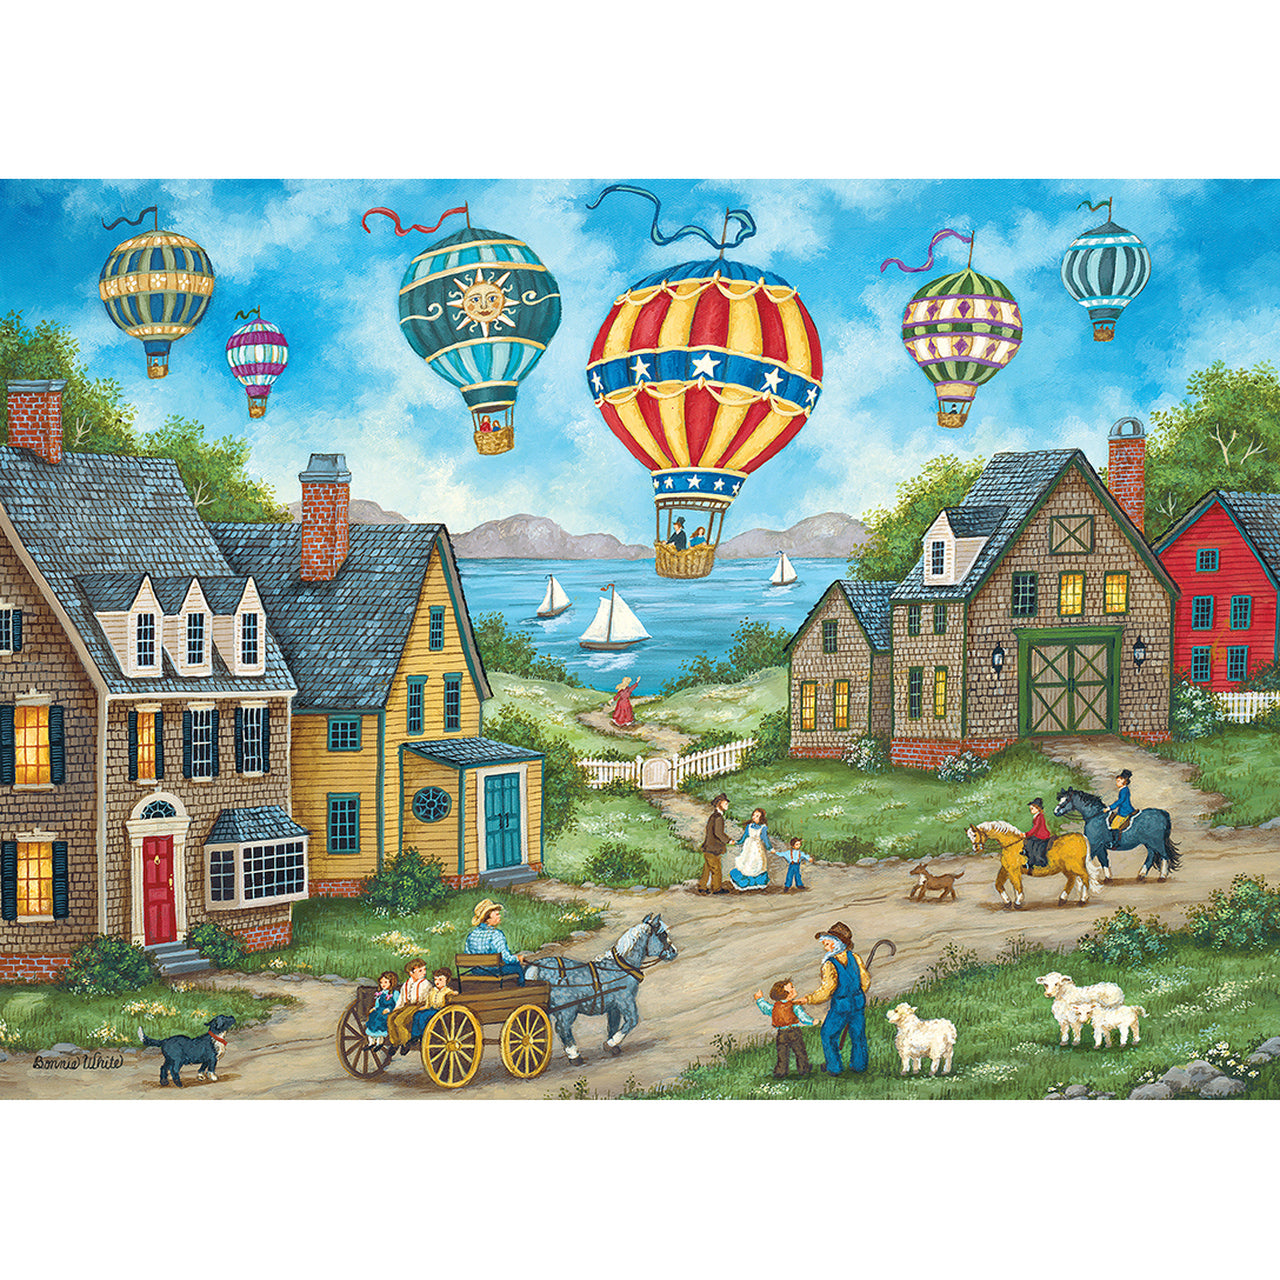 Hometown Gallery - Passing Through 1000 Piece Jigsaw Puzzle by Masterpieces